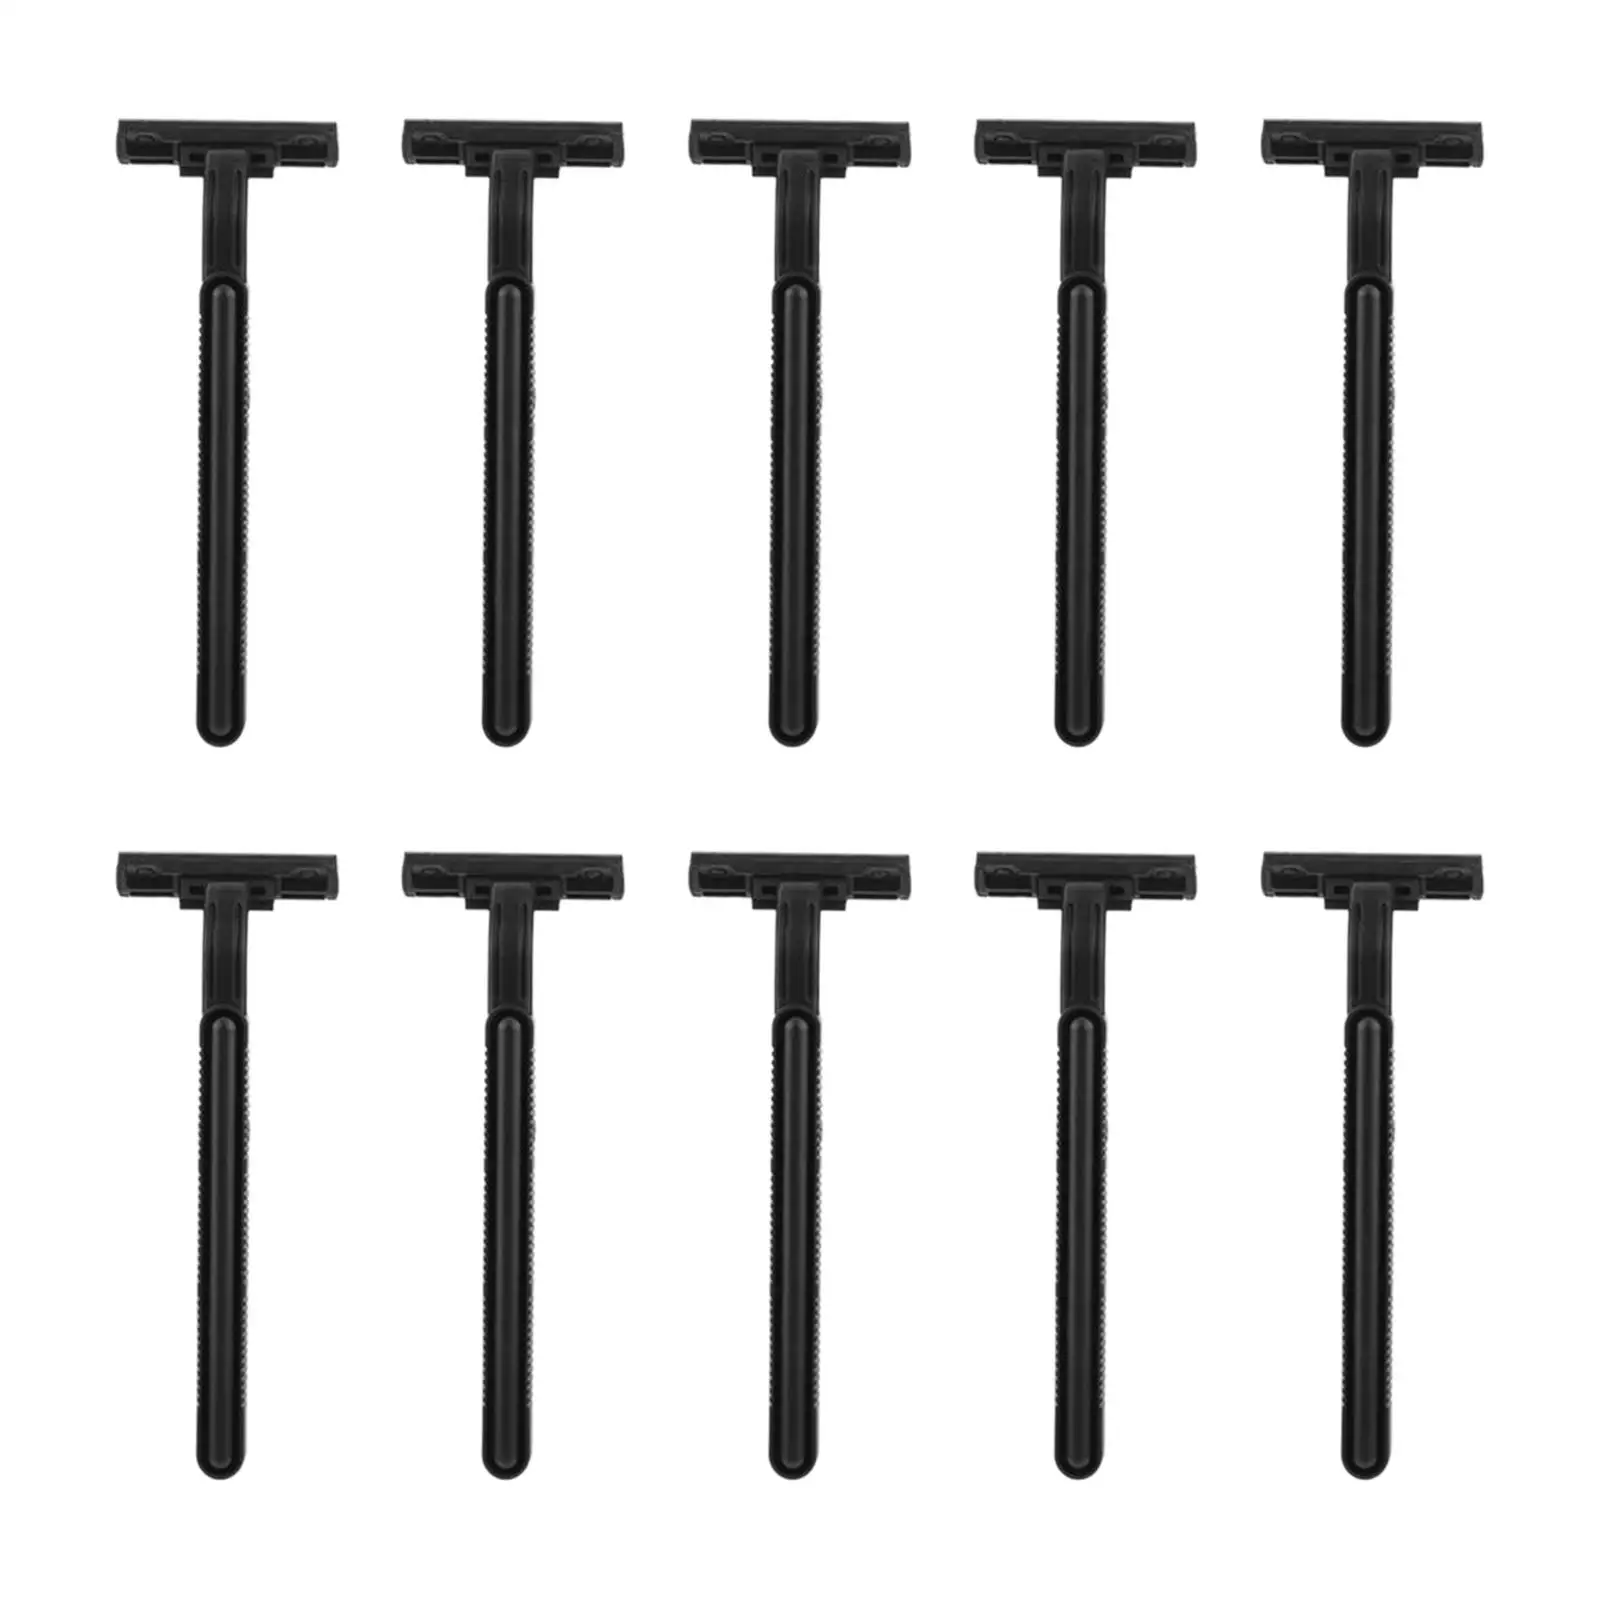 10Pcs Disposable Shaver Long Non Slip Handle Grooming Tool Shaver Face Hair Removal for Men Barber Shop Use Travel